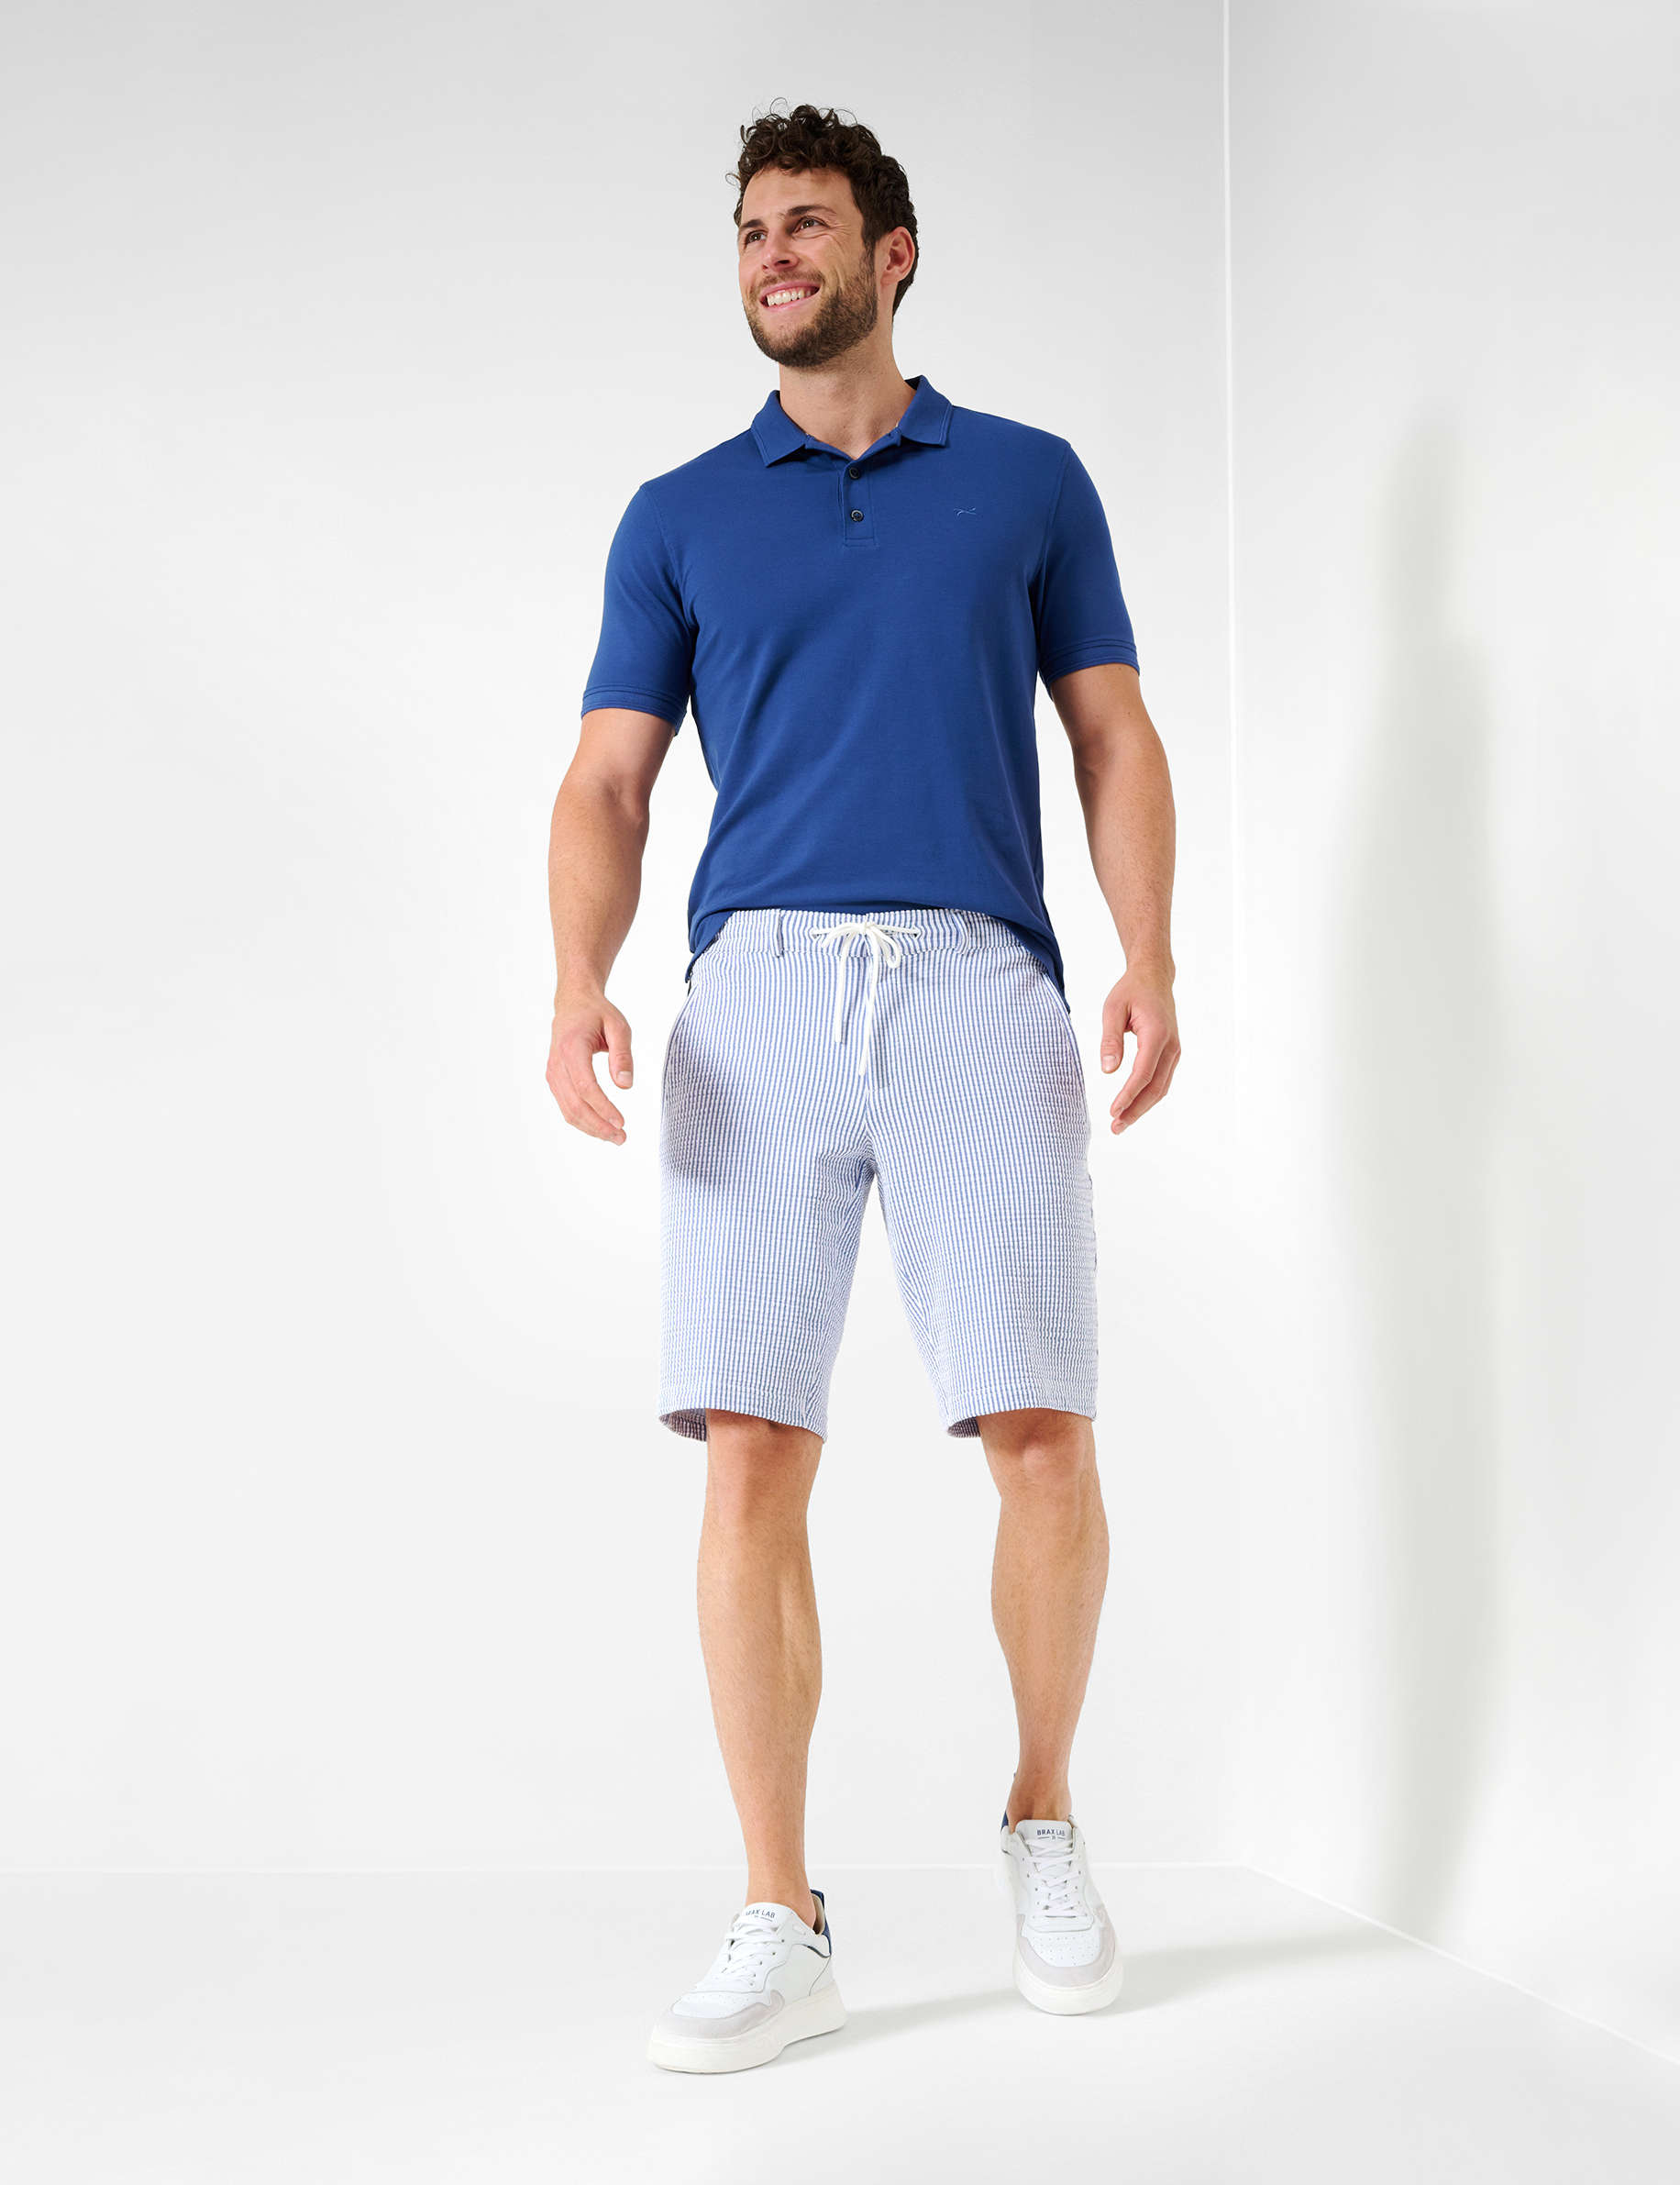 Men Style PHIL DUSTY BLUE Modern Fit Model Outfit